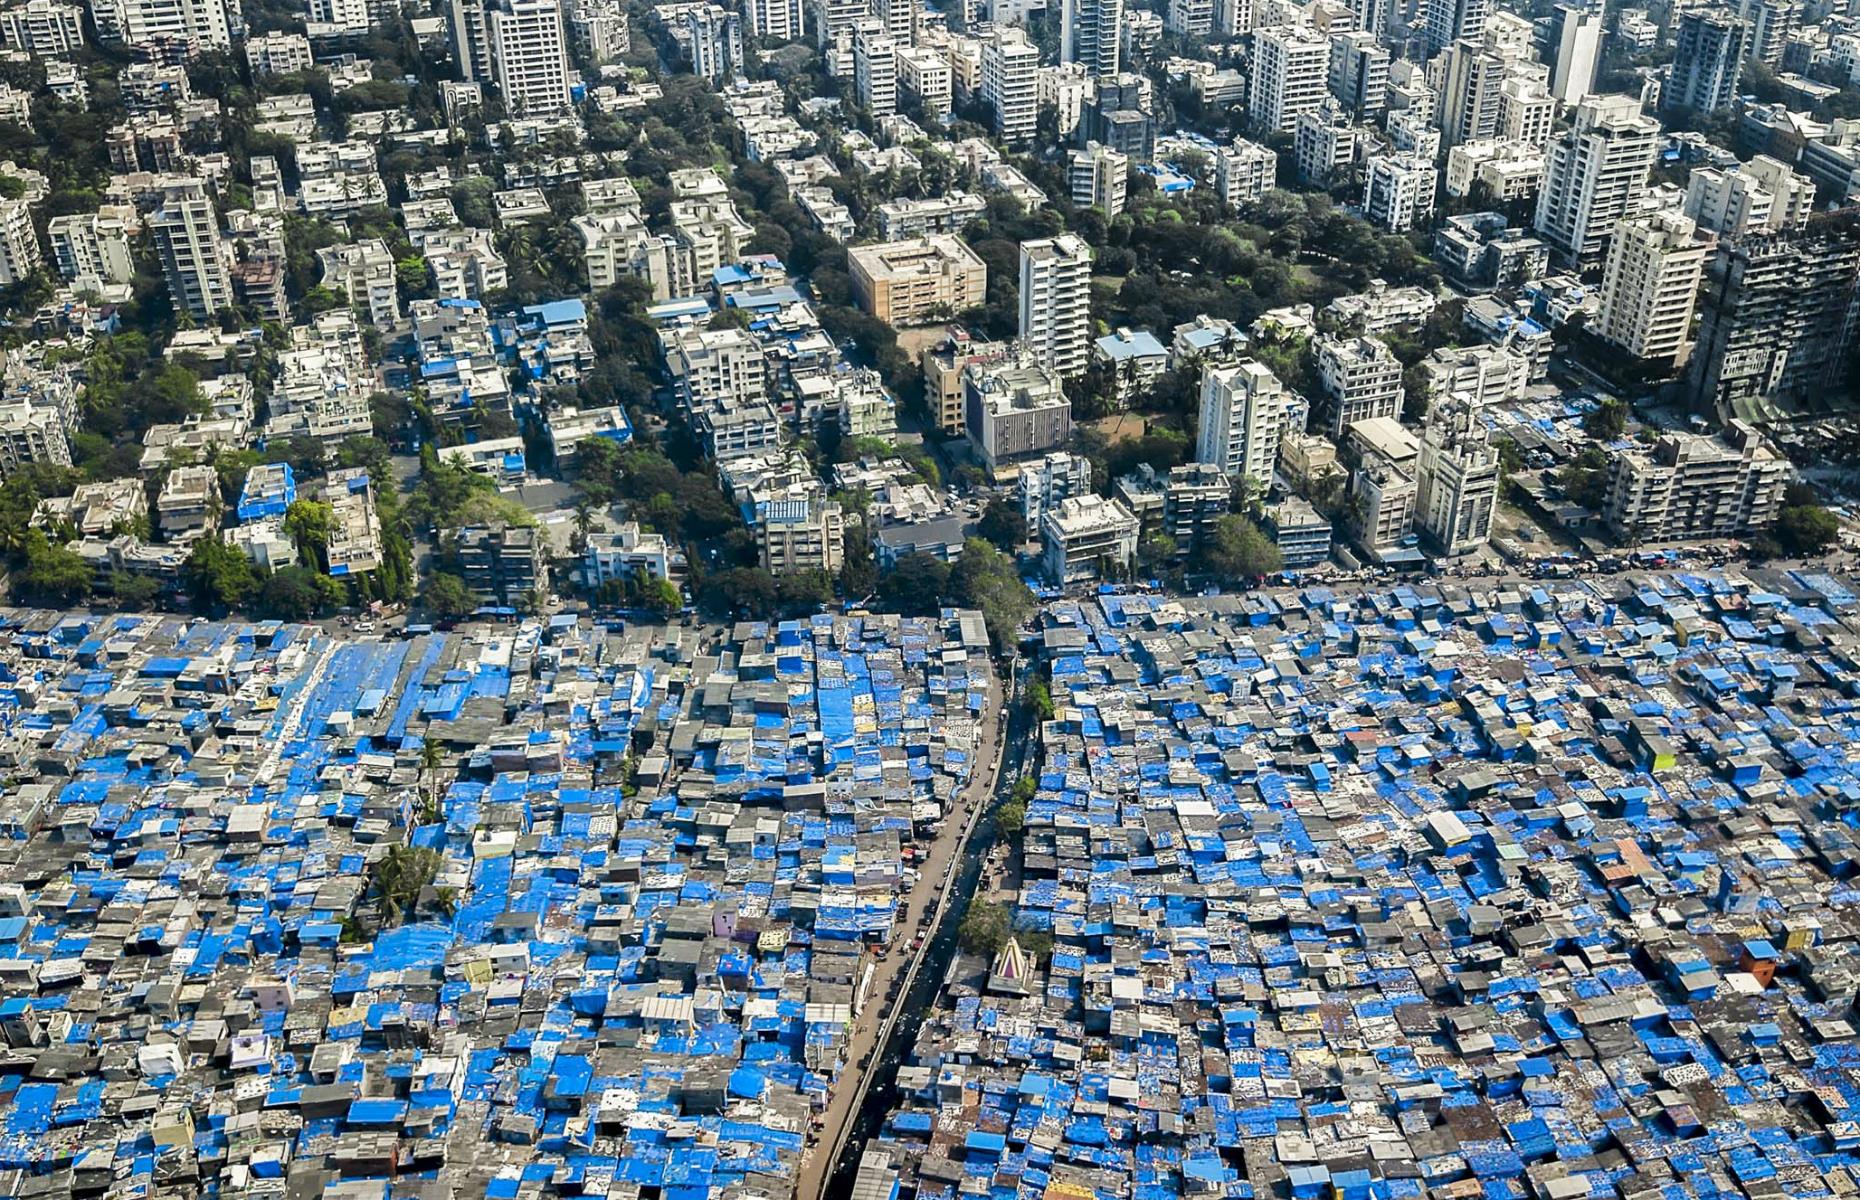 <p>Mumbai in India is densely packed with more than 20 million inhabitants. Not only that but the city has the largest slum population of any city in the world. In fact, as many as 43.1% of Mumbai's population lives in slums, according to the most recent census, similar to the one pictured, where blue tarpaulin is the only defence against the monsoon season. A study released recently has found that more than half of residents living in Mumbai's crowded slums have contracted coronavirus, where the disease has been spreading much faster than among richer parts of the population.</p>